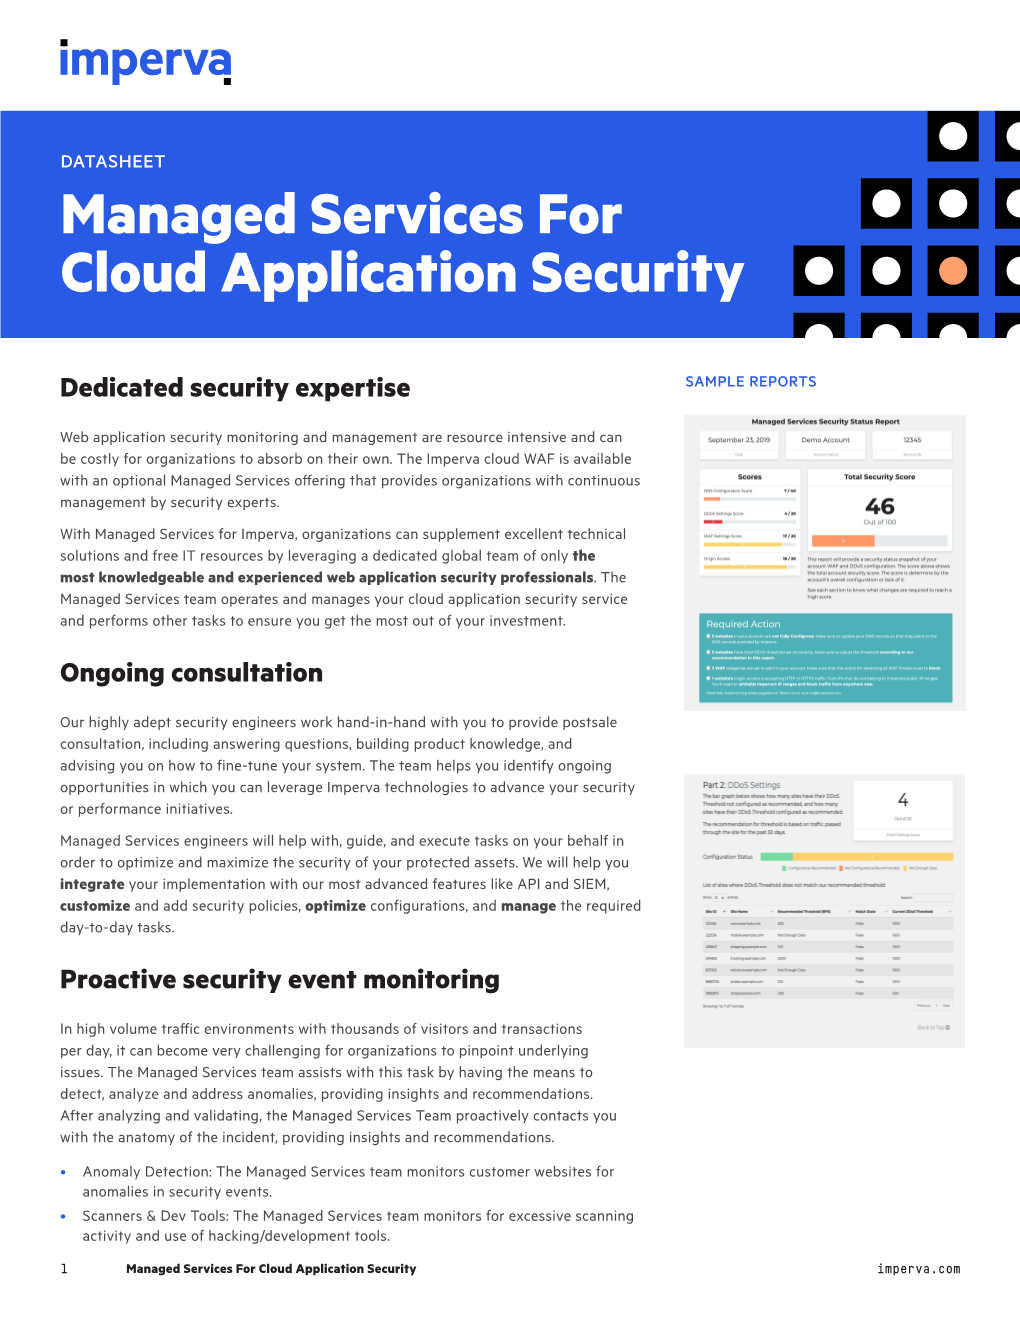 Managed Services for Cloud Application Security